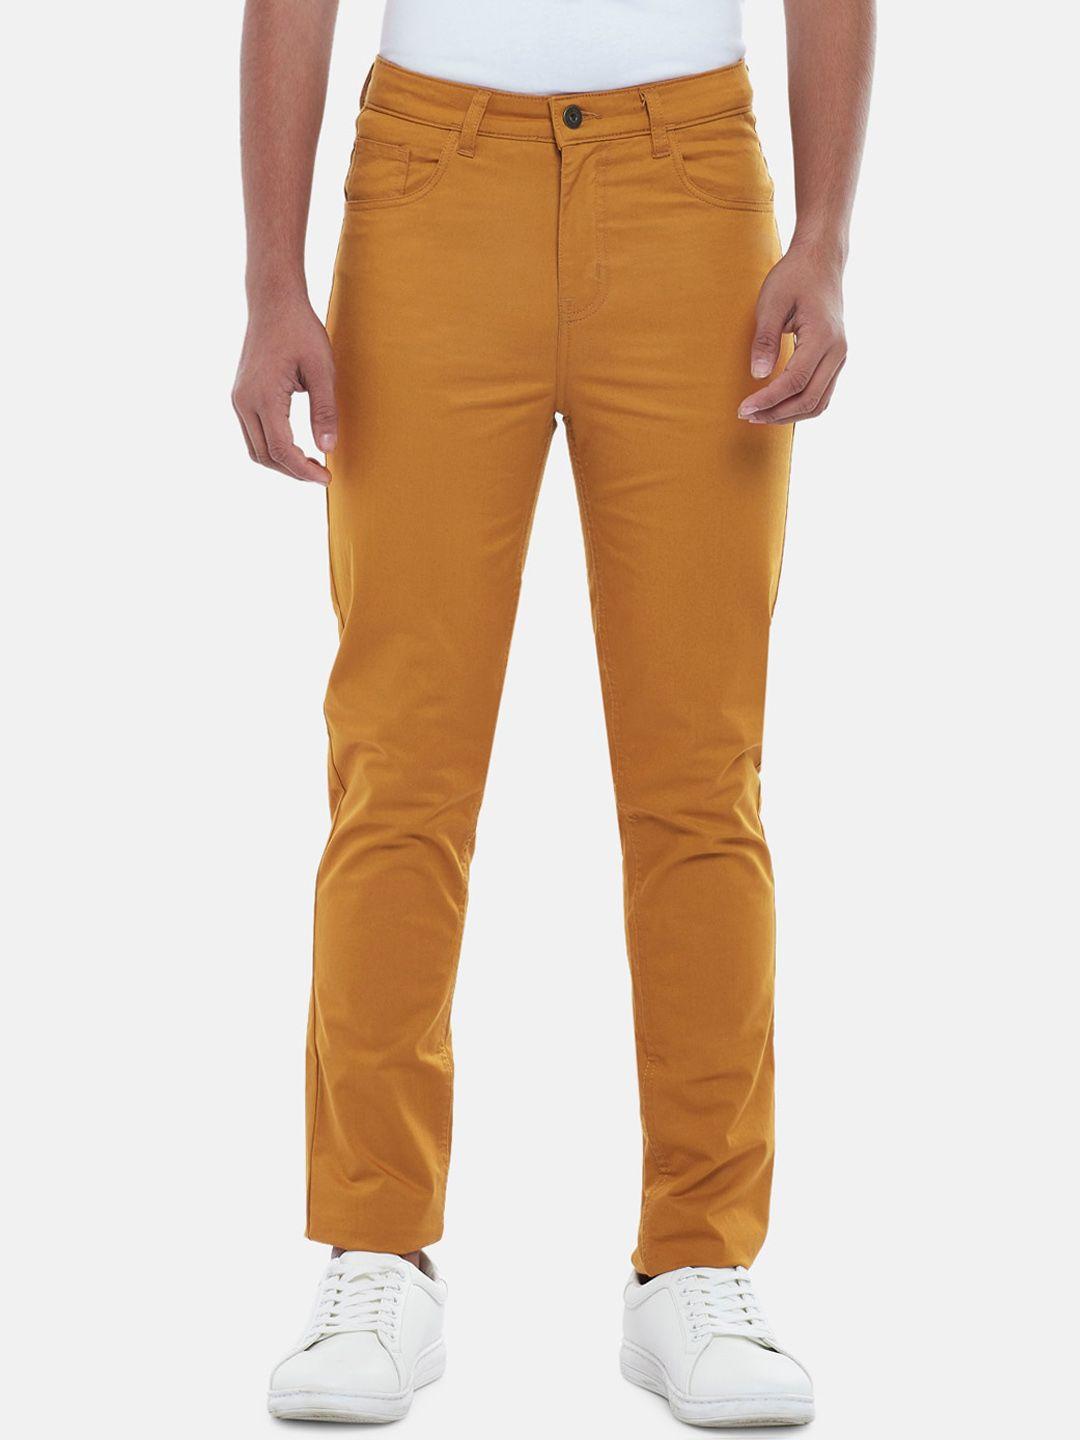 coolsters by pantaloons boys mustard yellow solid cotton trousers